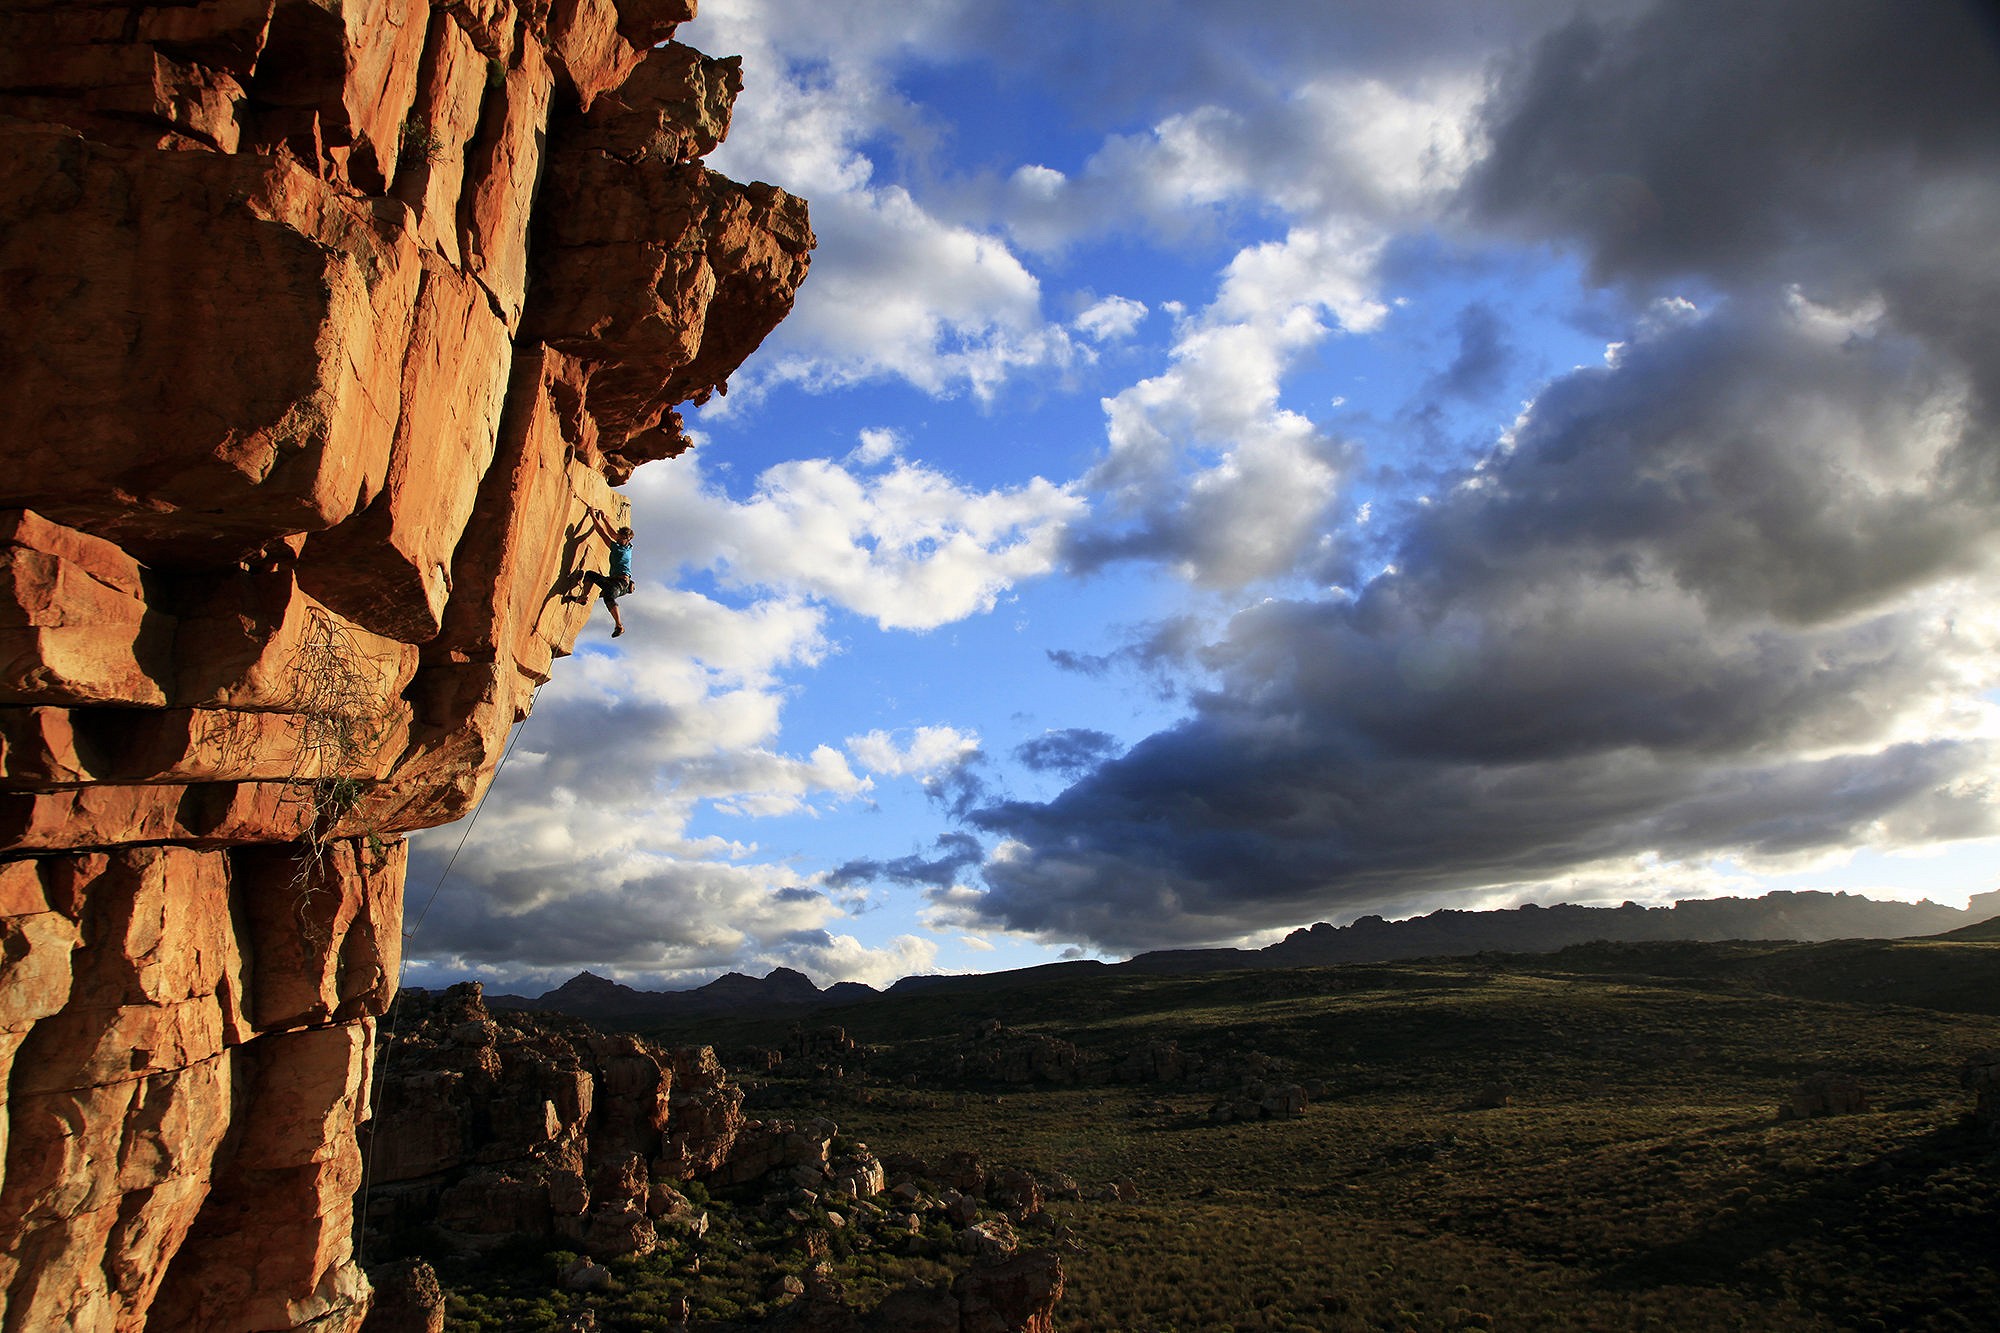 The author climbing in the Cederberg Wilderness Area, Western Cape, South Africa.  © Ramon Marin